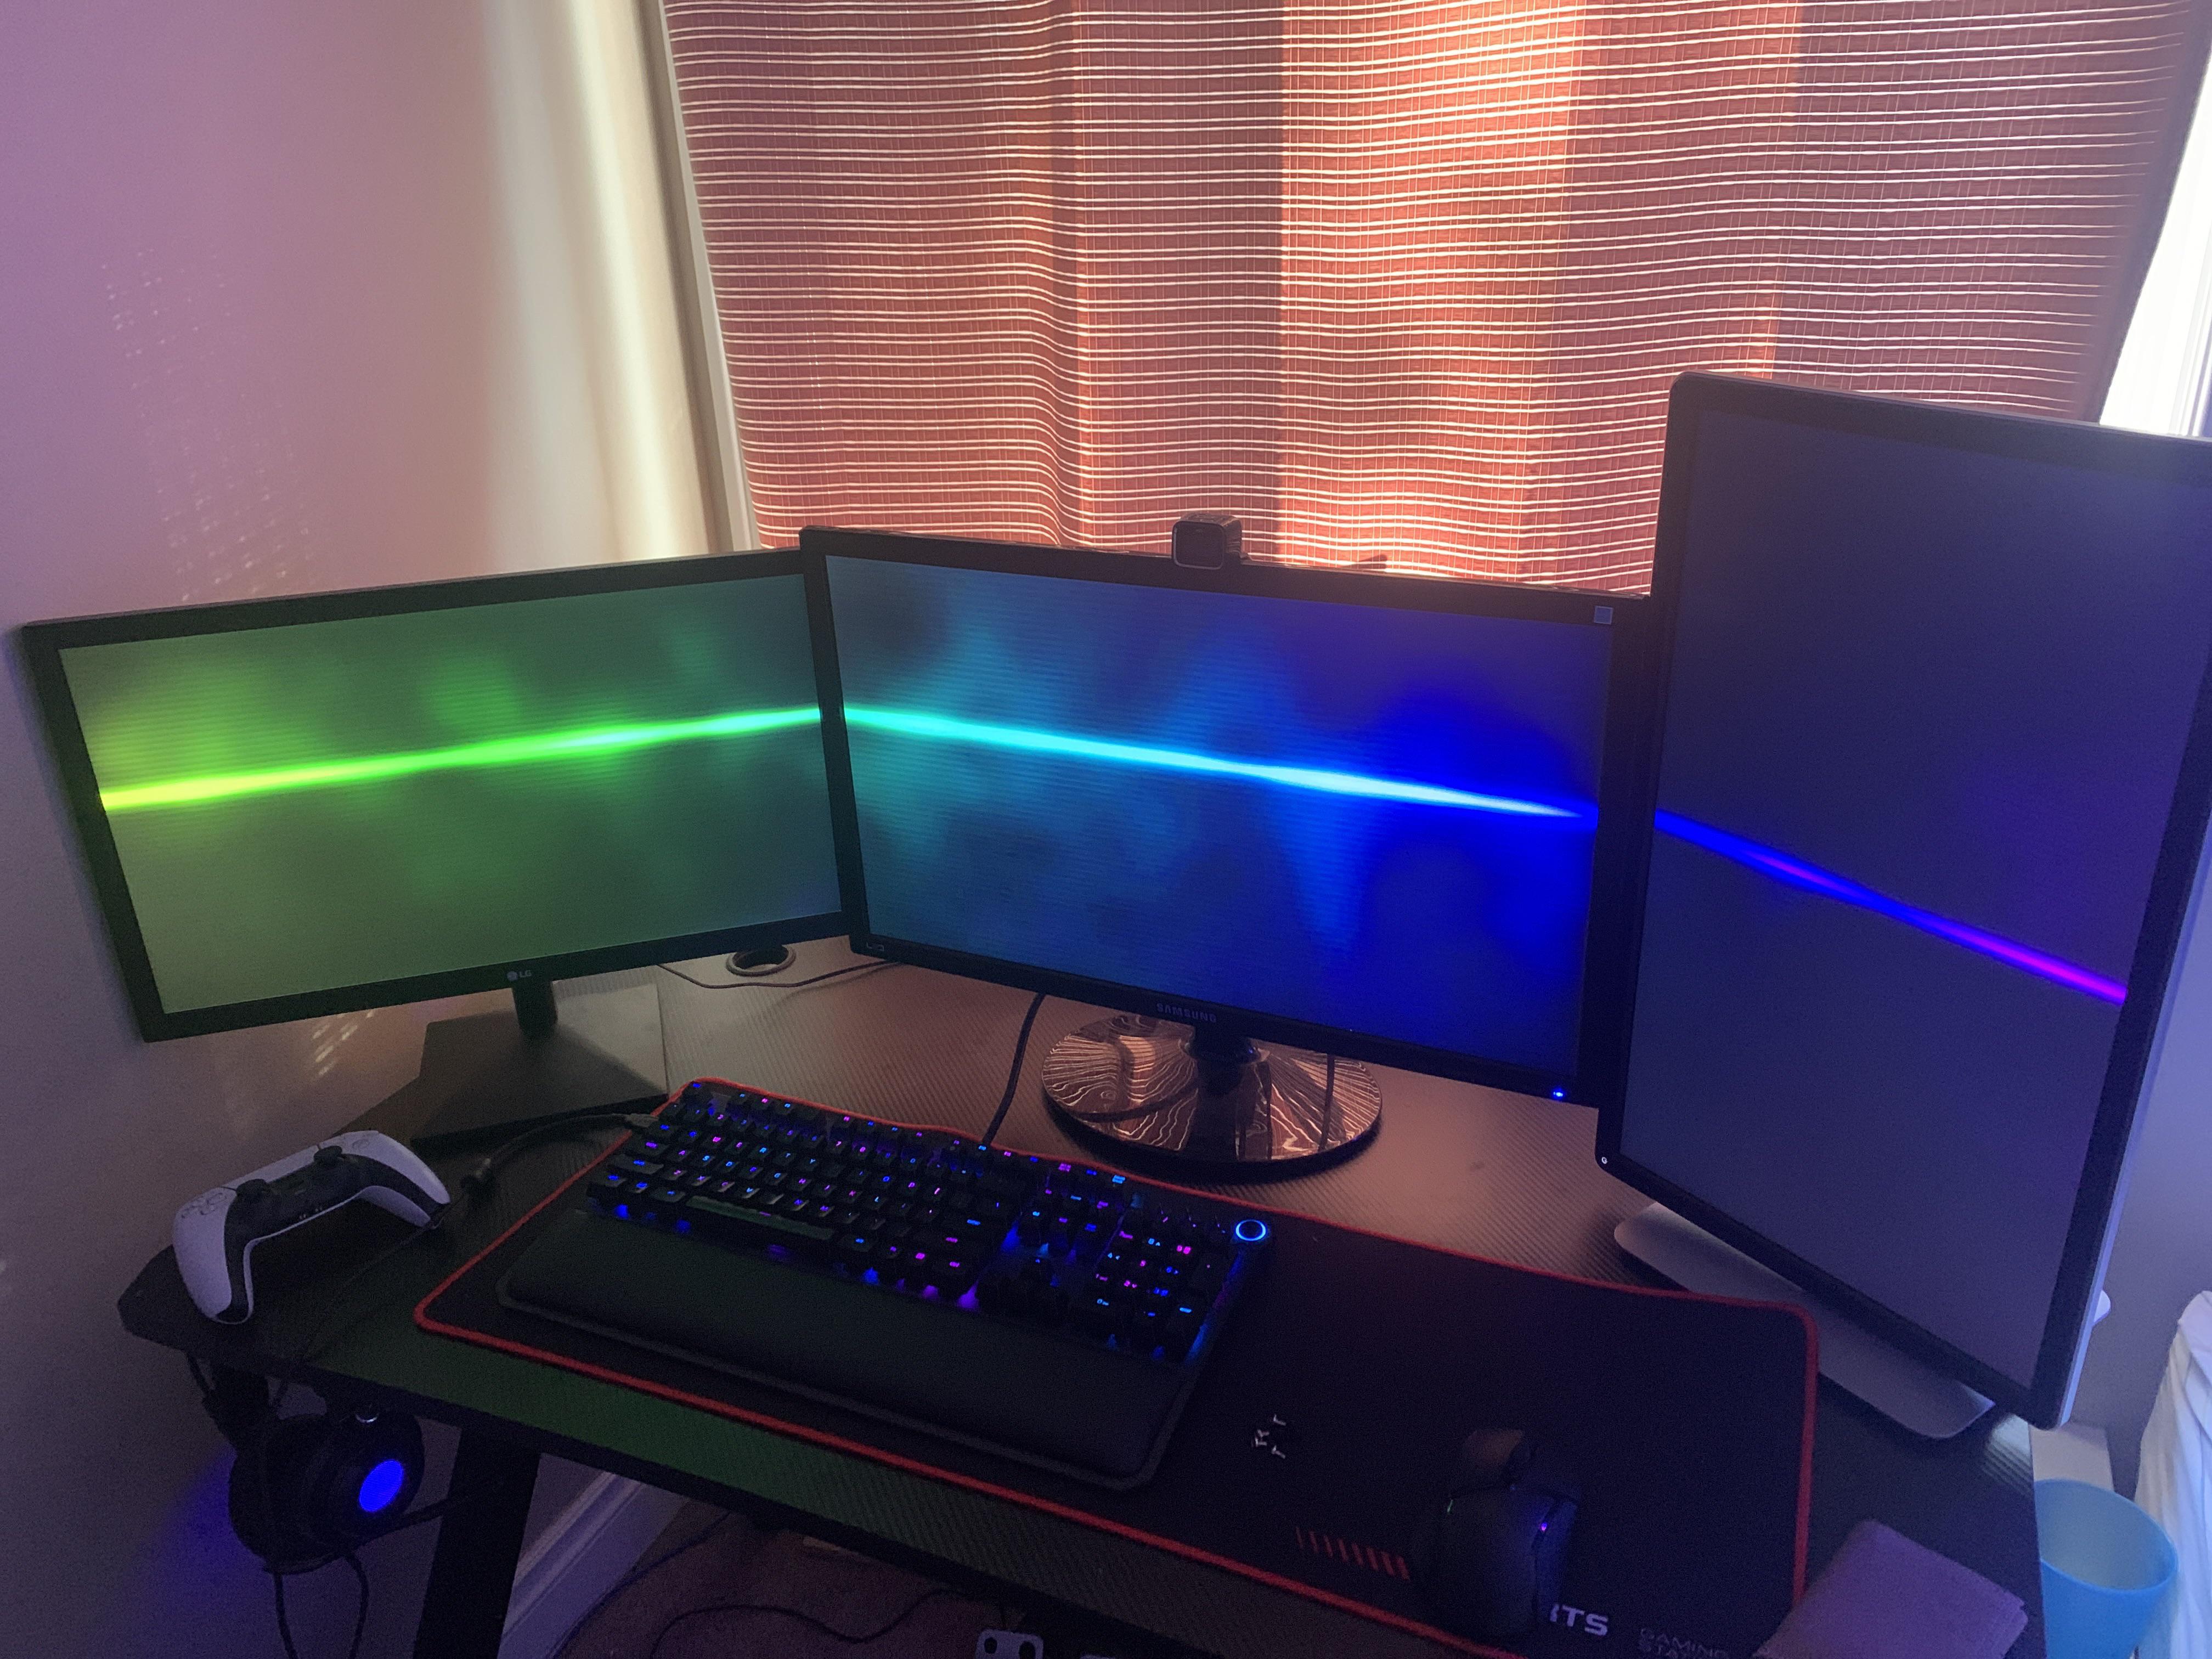 5760x1080] Is there any good place to find triple monitor